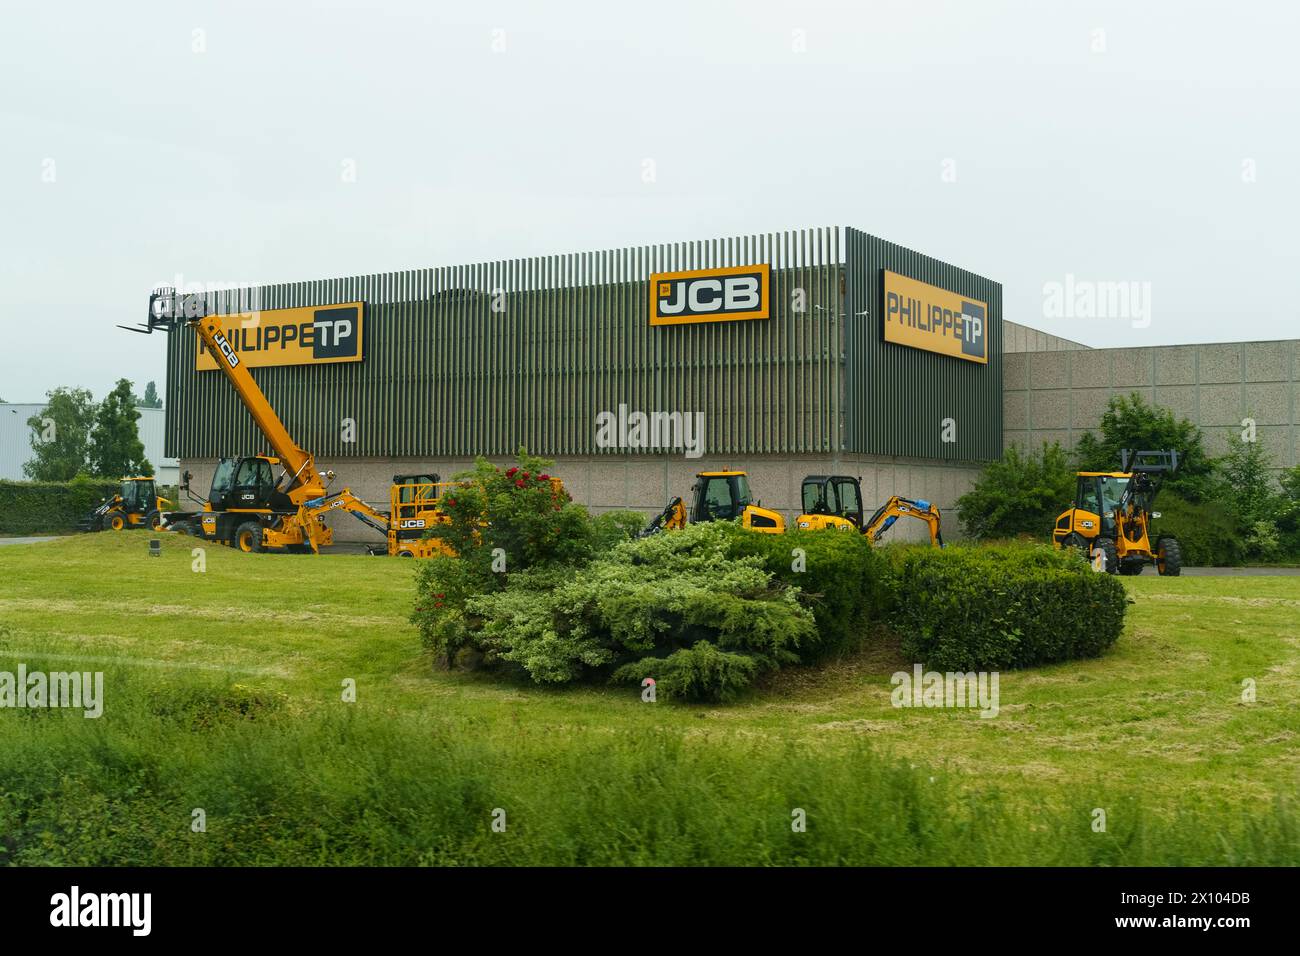 Noyelles-Godeau, France - May 22, 2023:A fleet of JCB construction machinery is lined up outside the Philippe TP warehouse, under a cloudy sky, indica Stock Photo